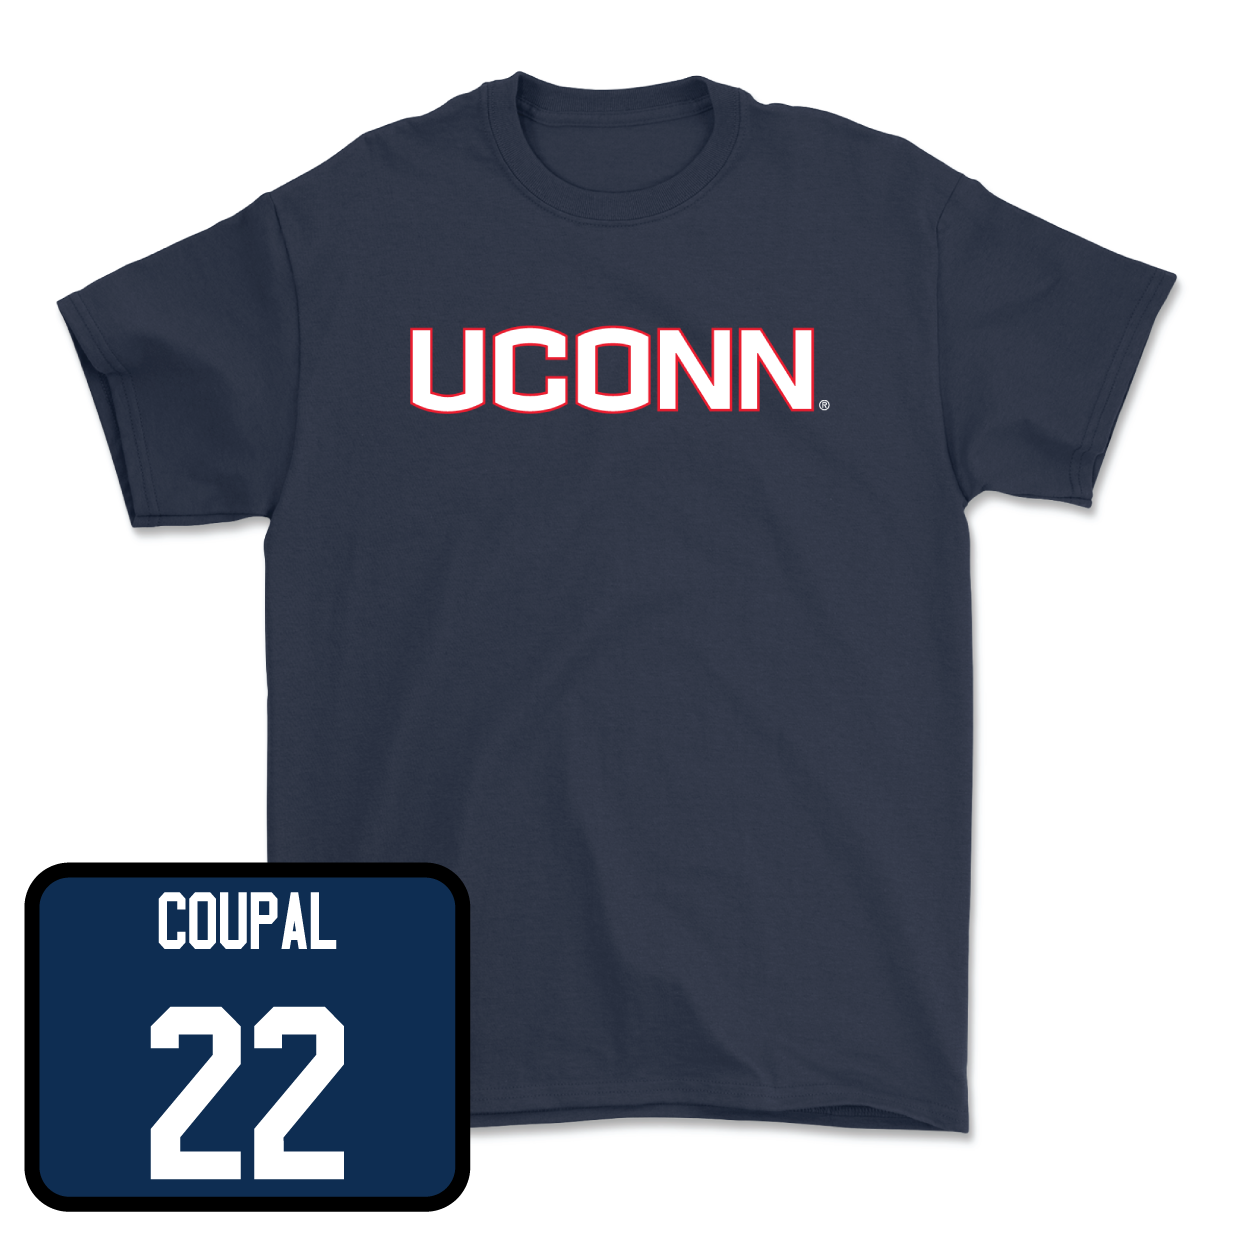 Navy Women's Track & Field UConn Tee Youth Large / Megan Minicucci